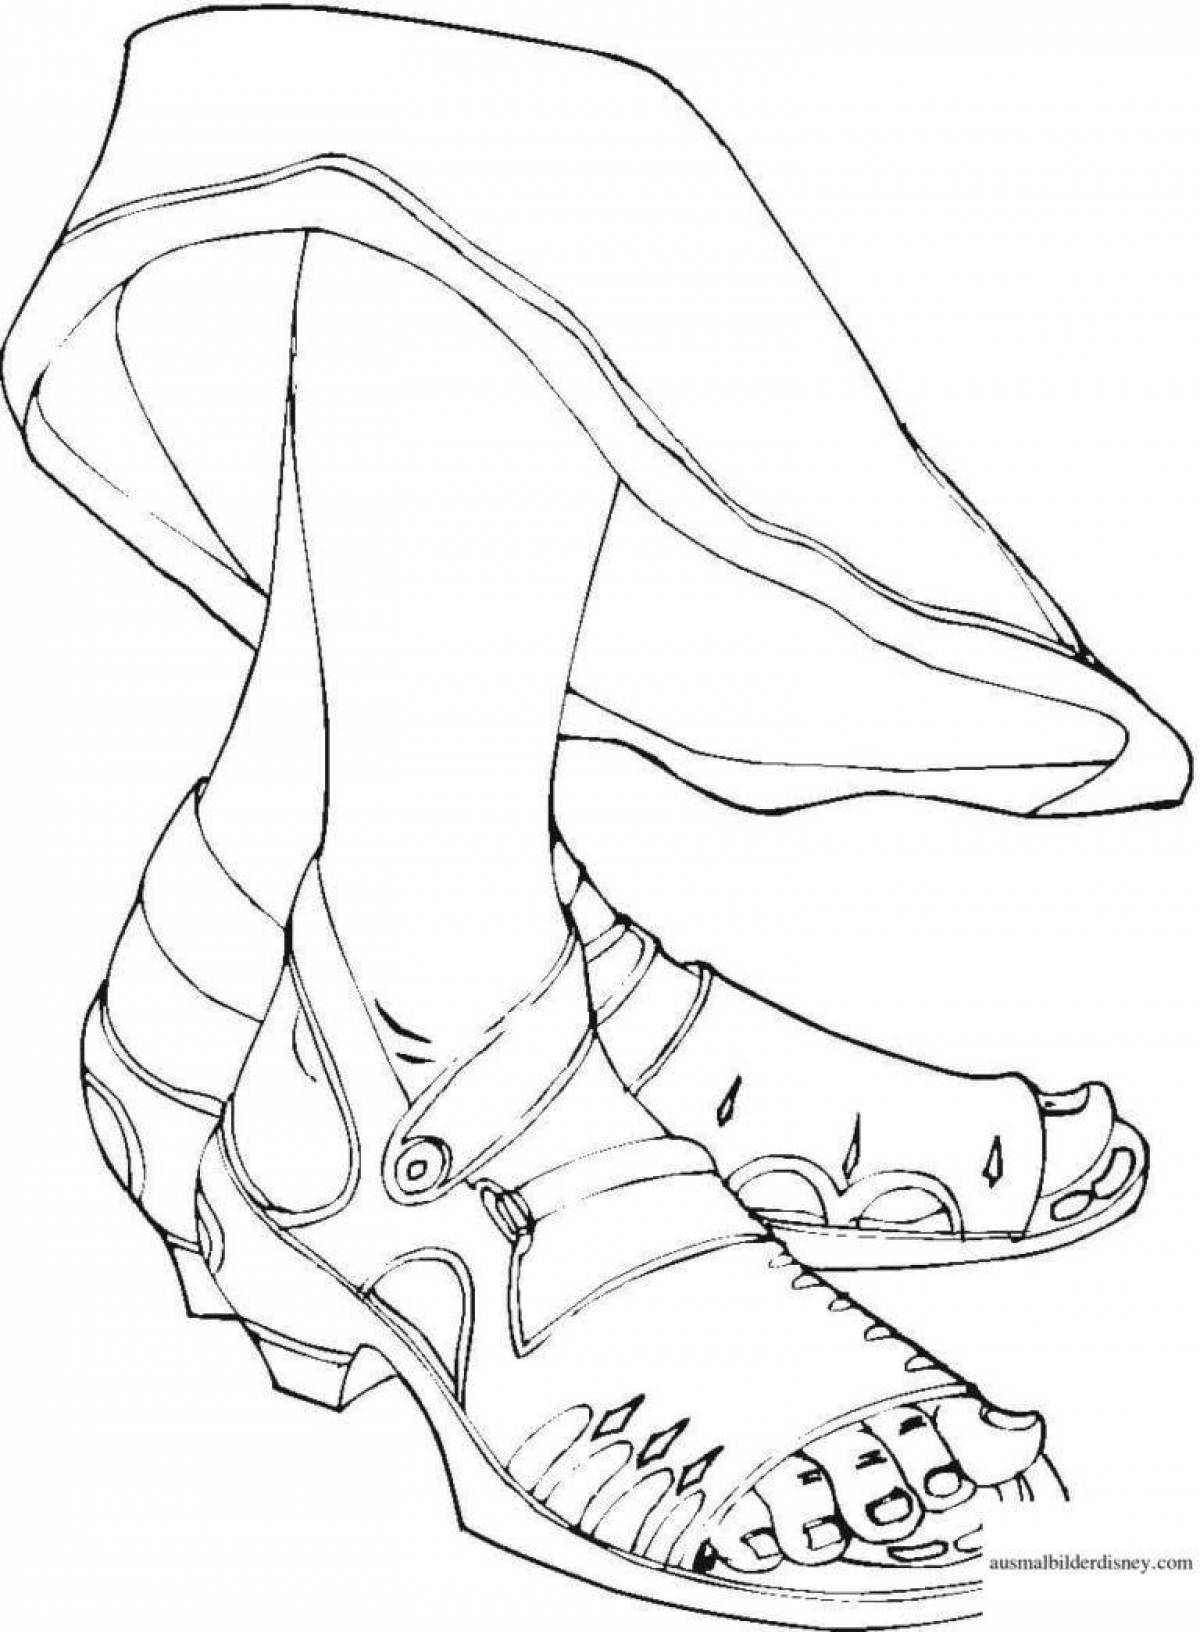 Shining legs coloring page